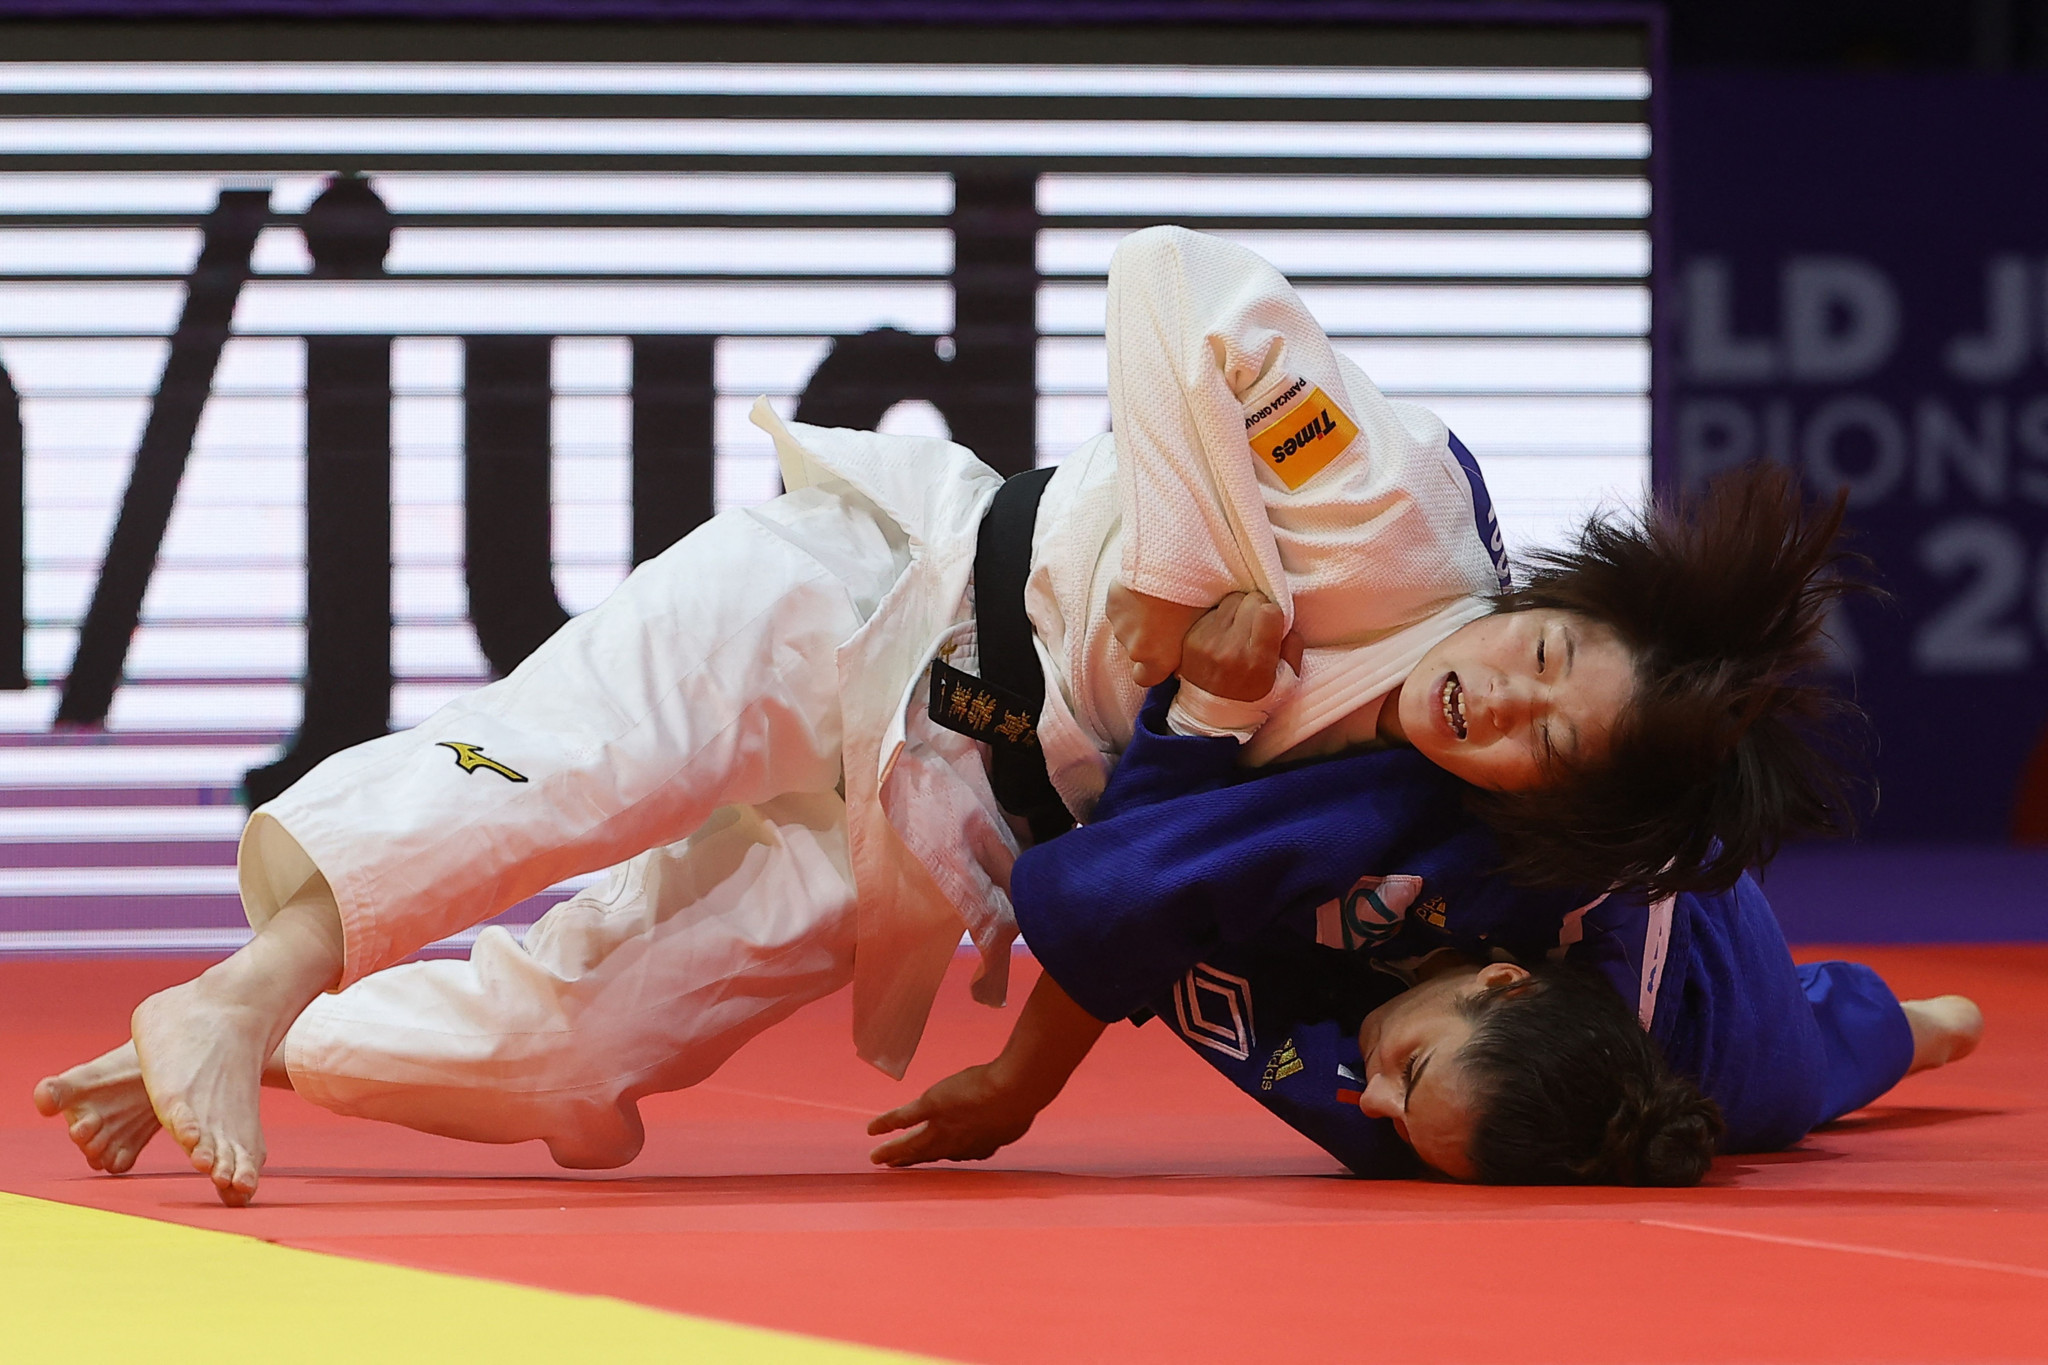 Wakana Koga of Japan proved too strong for France's Blandine Pont as she sealed bronze ©Getty Images